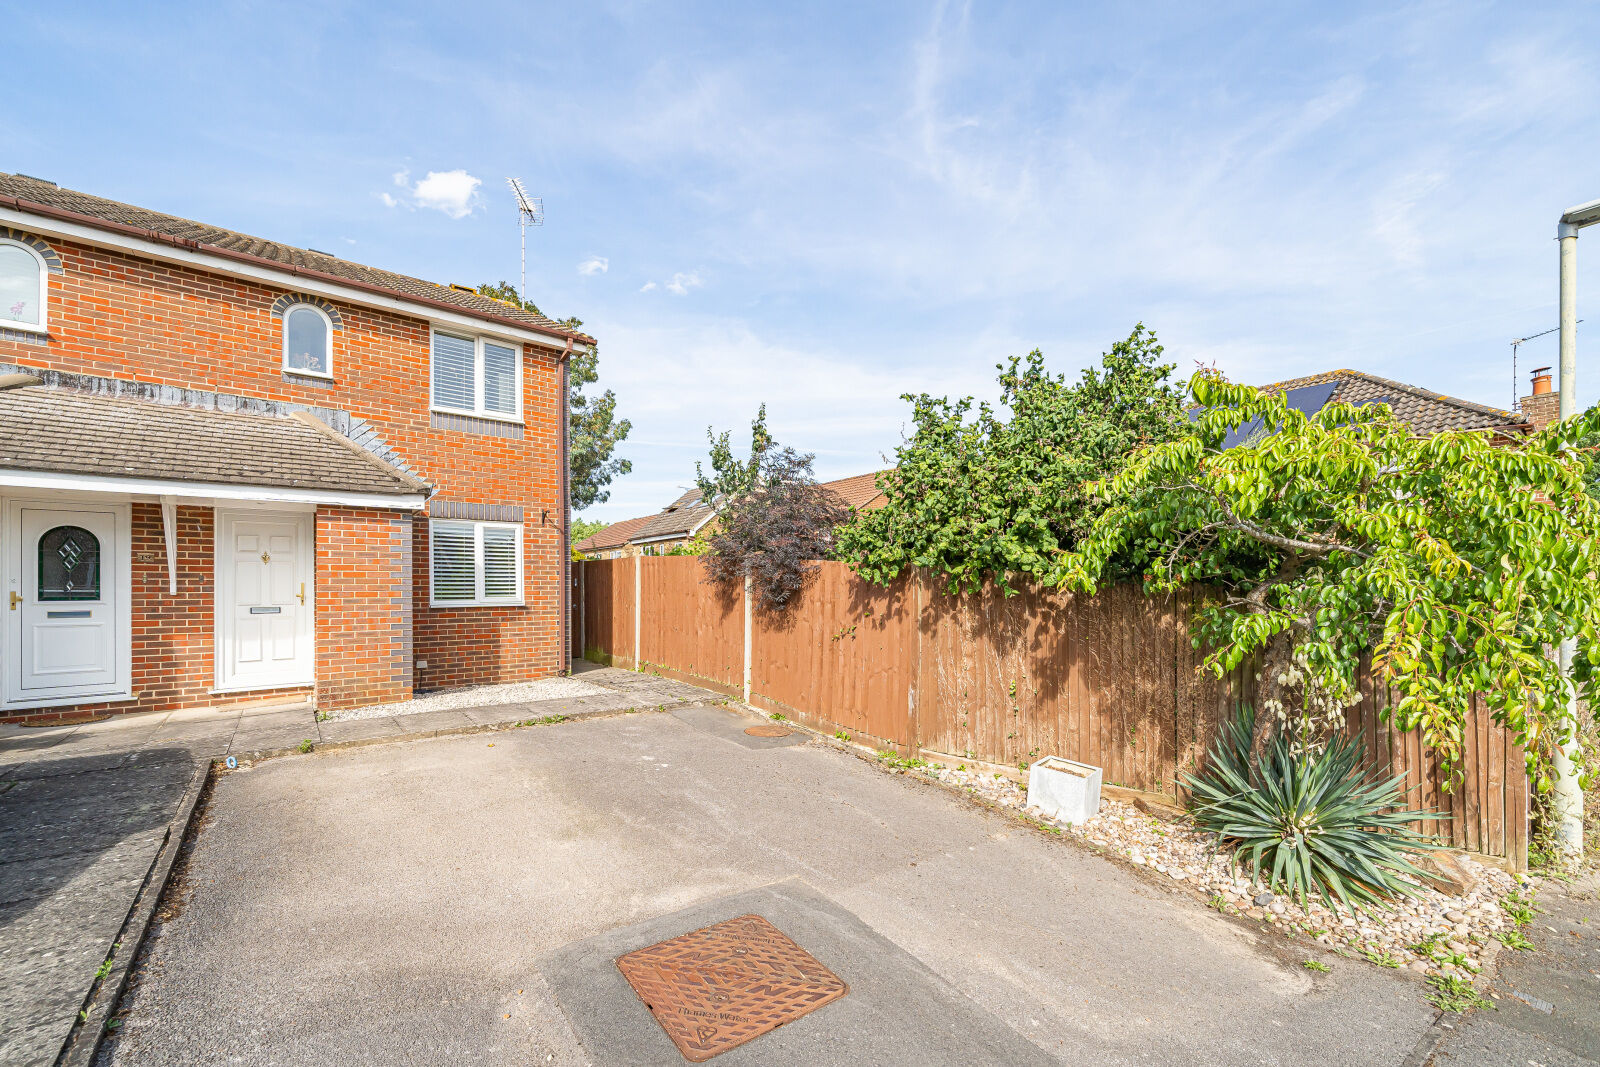 2 bedroom semi detached house for sale Poundfield Way, Twyford, RG10, main image